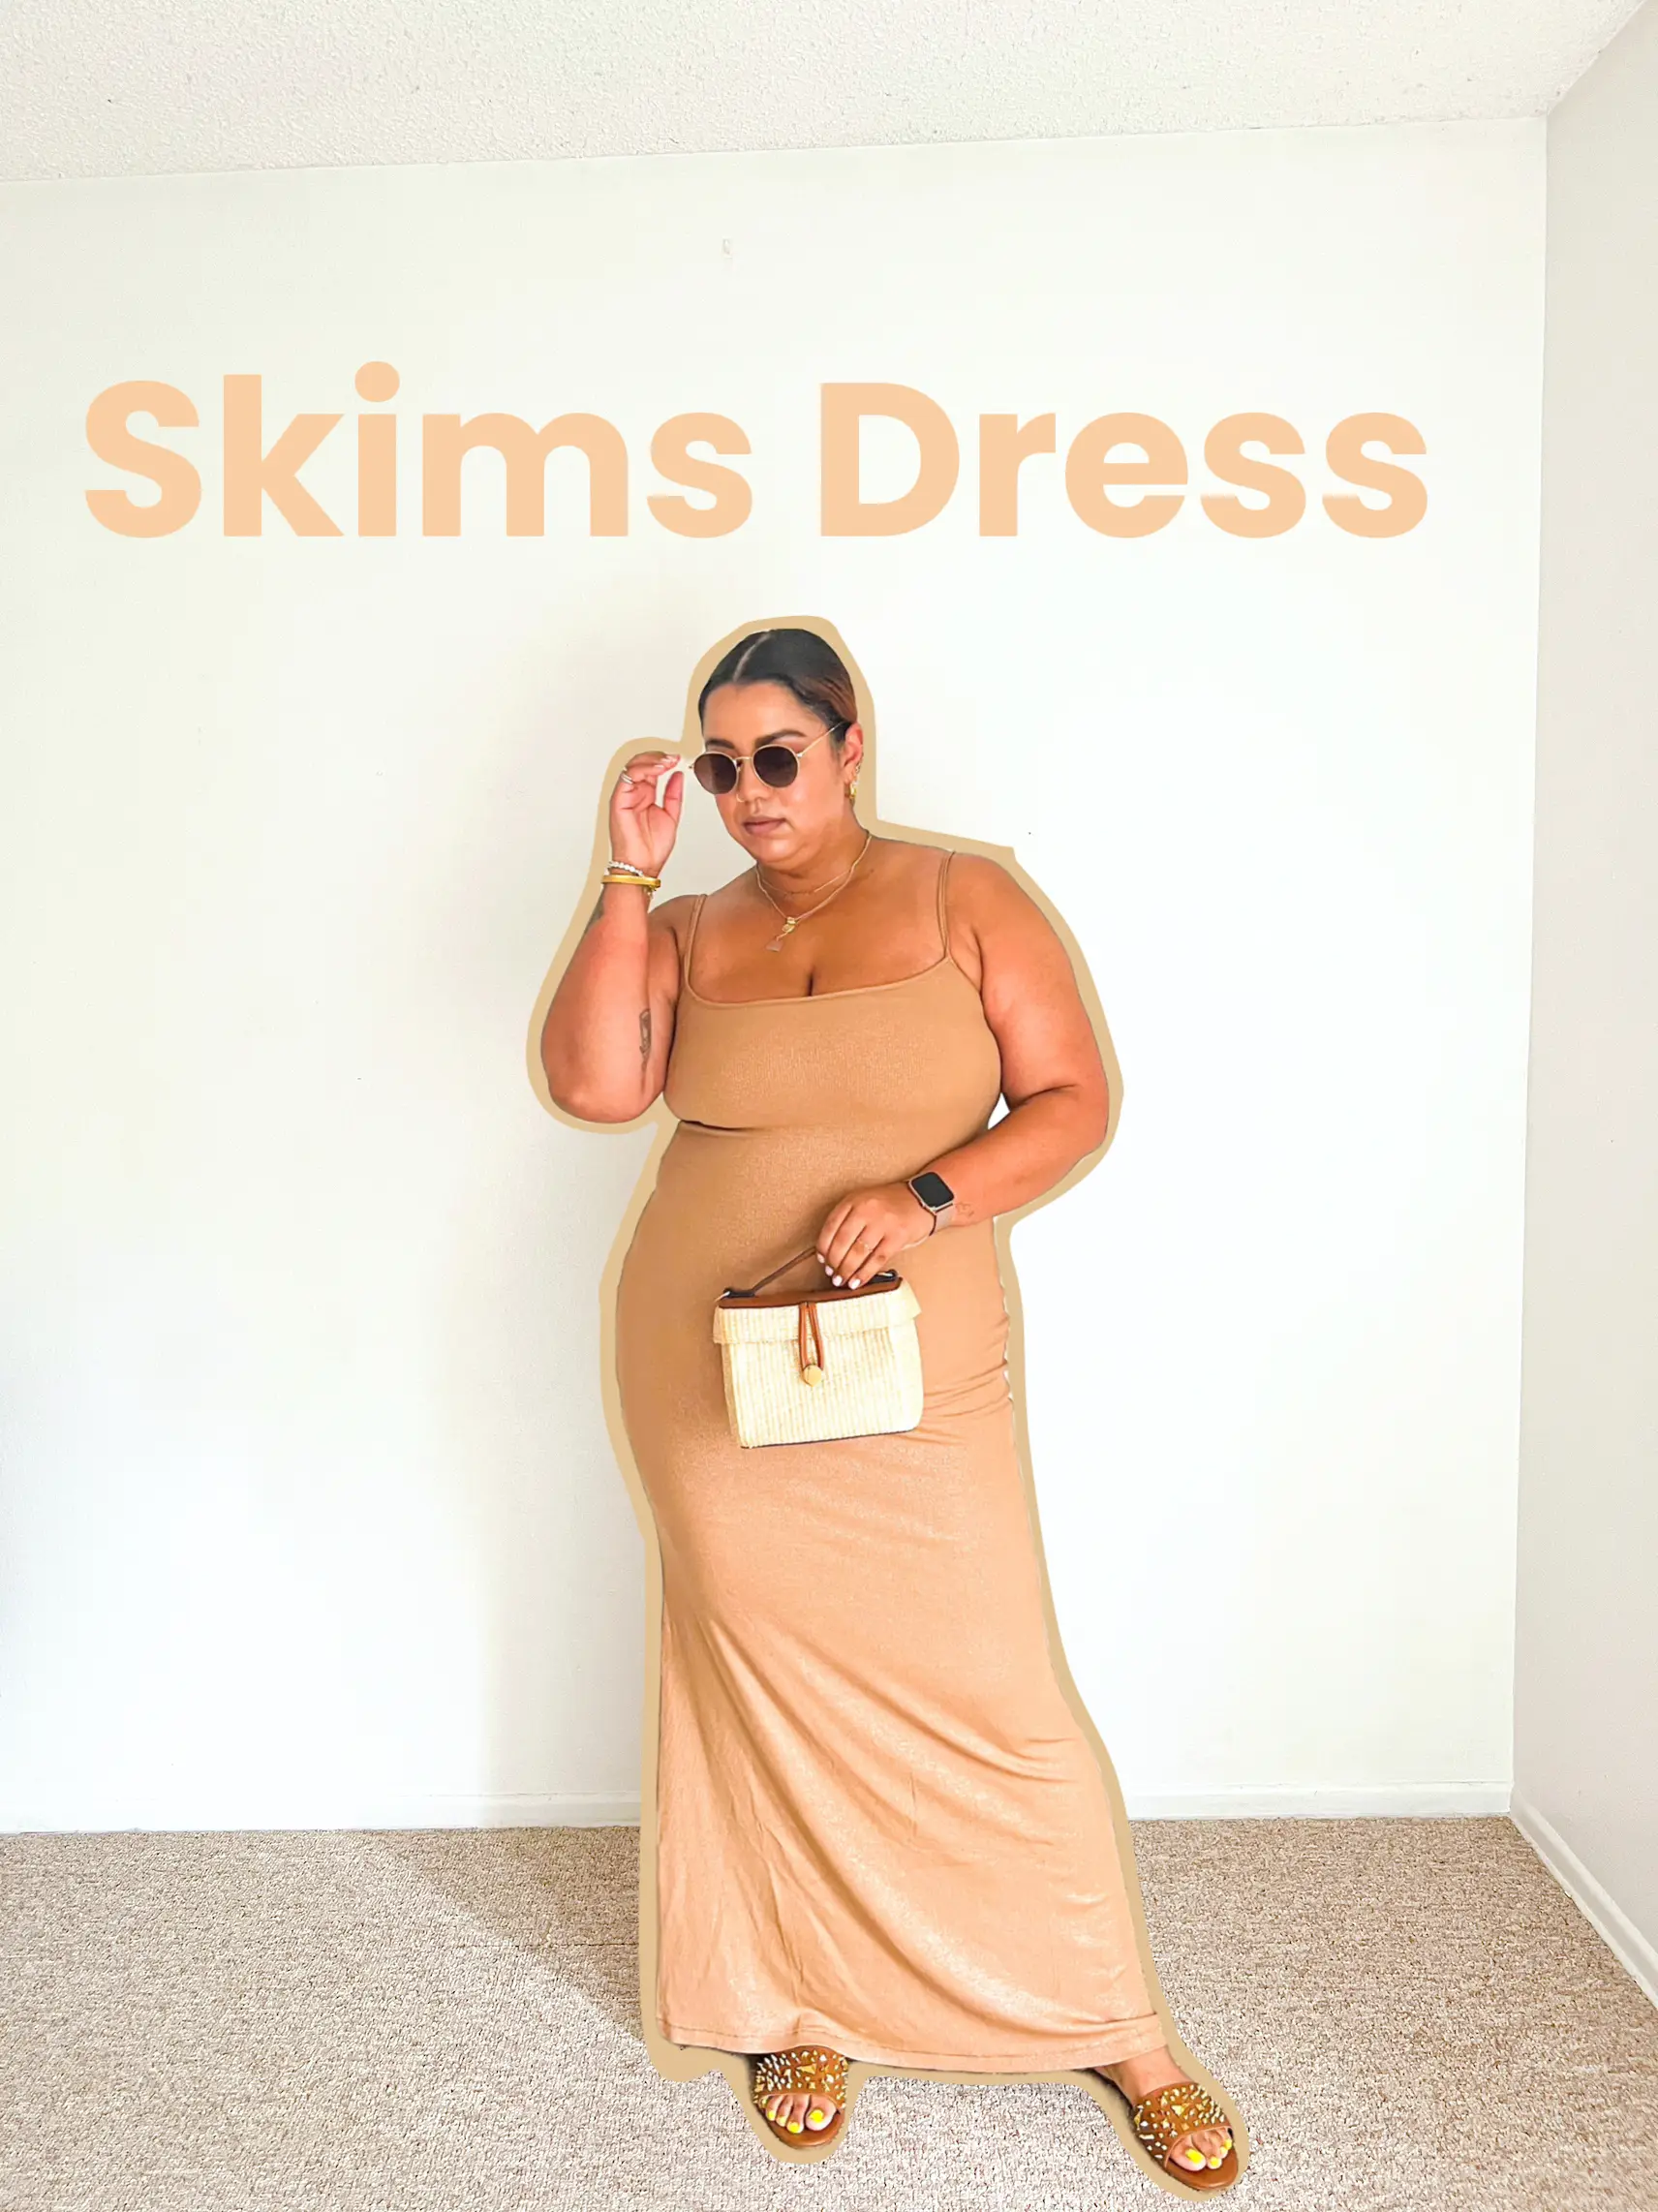 SKIMS MIDSIZE TRY ON HAUL, Gallery posted by MIKAYLA JADE